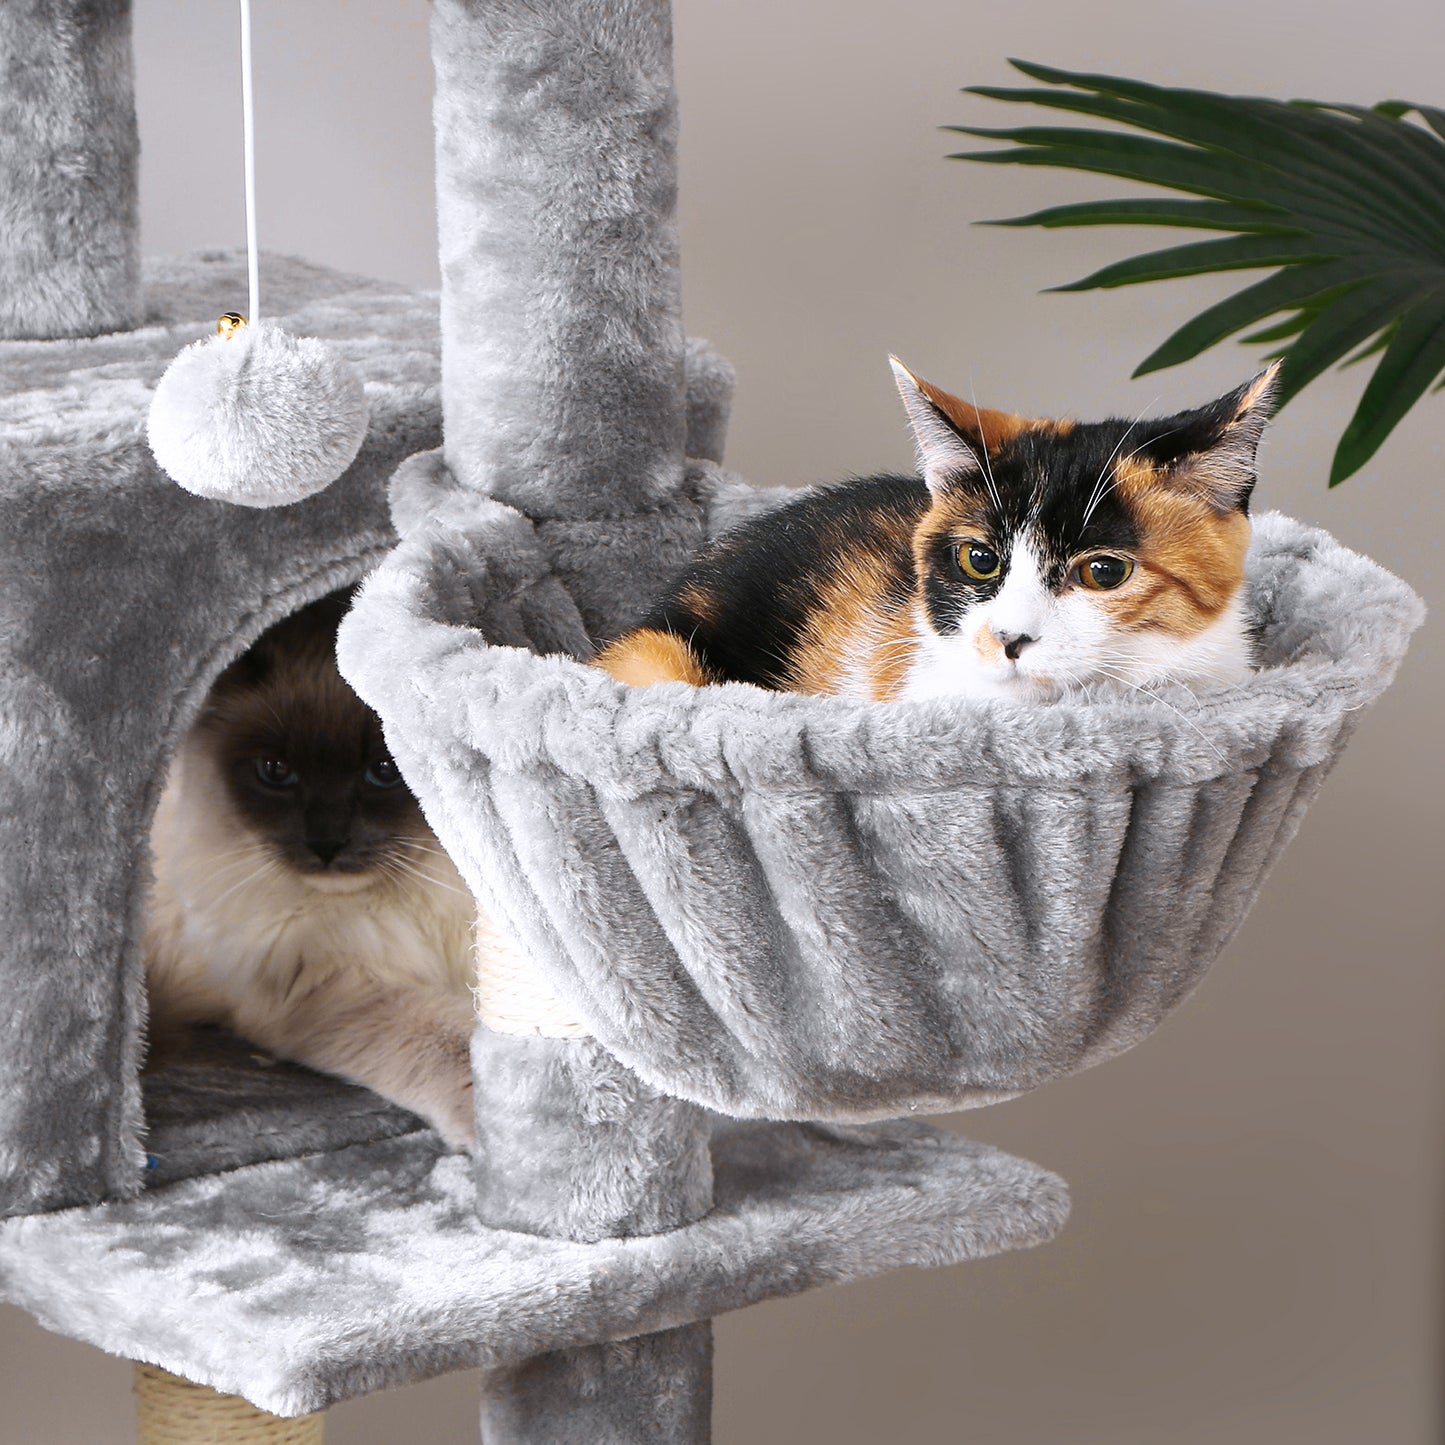 BEWISHOME Cat Tree Tower with Top Plush Perch Multi-Level Cat Condo Sisal Scratching Posts, Cat Play House Activity Center Cat Furniture MMJ12L